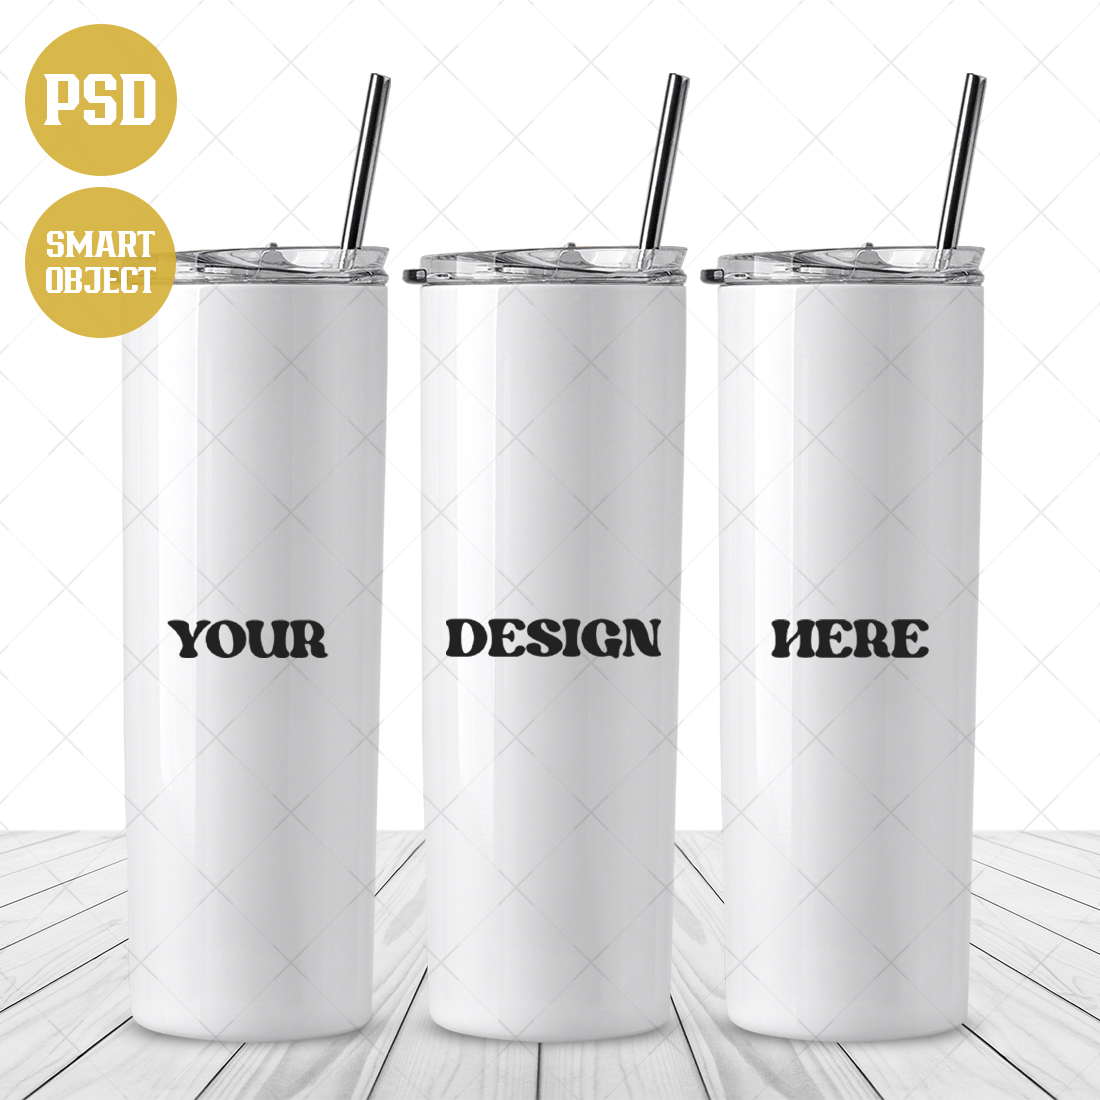 Dye Sublimation LED Lid Smart Tumbler Mockup Add Your Own Image and  Background 